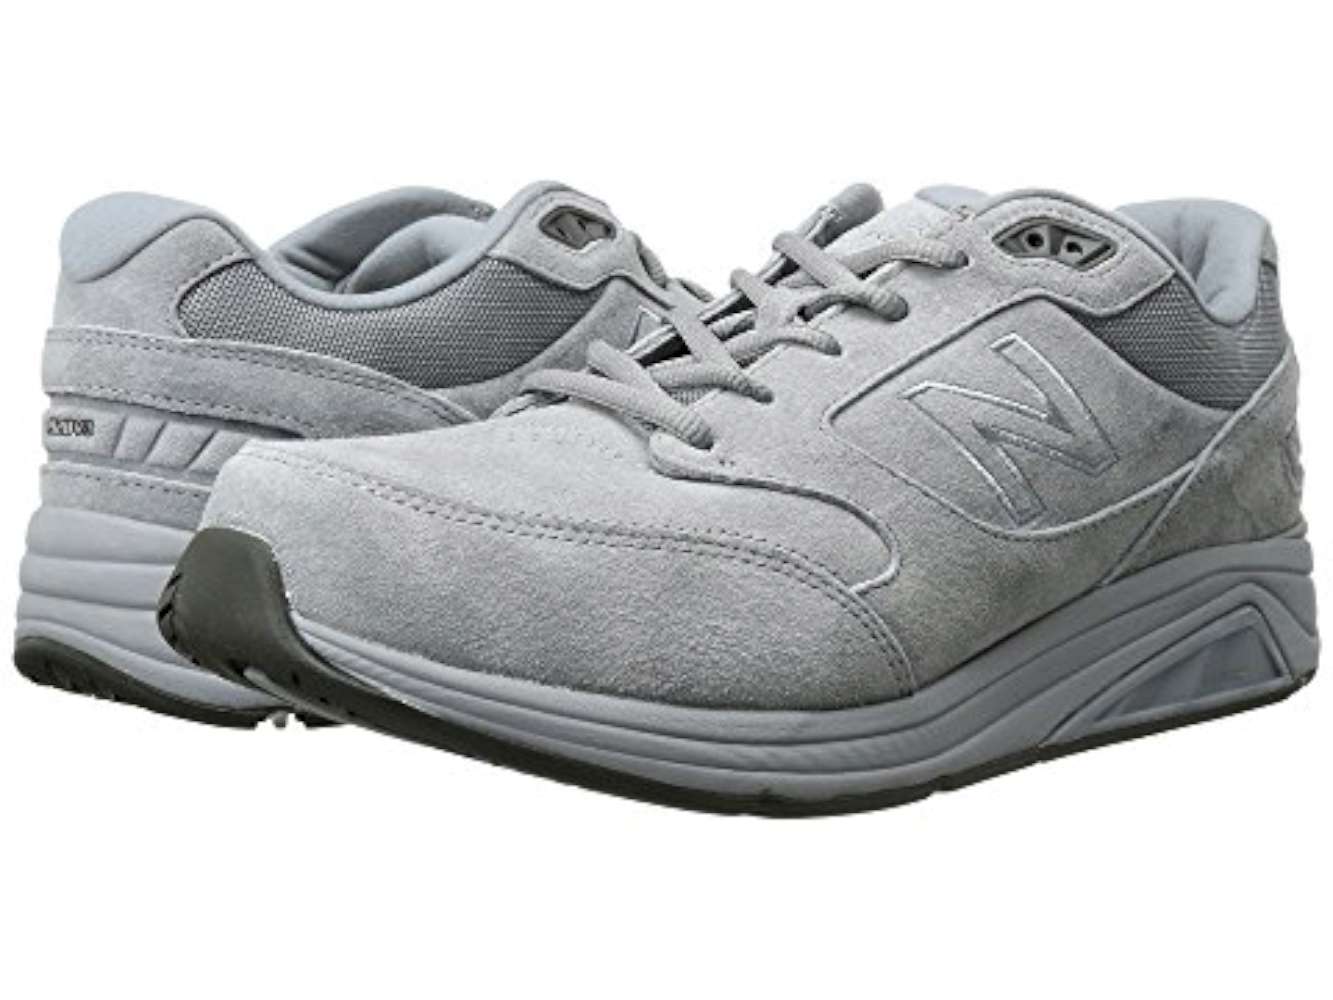 Walking Shoes, Grey, Size 7.5 s5aX 